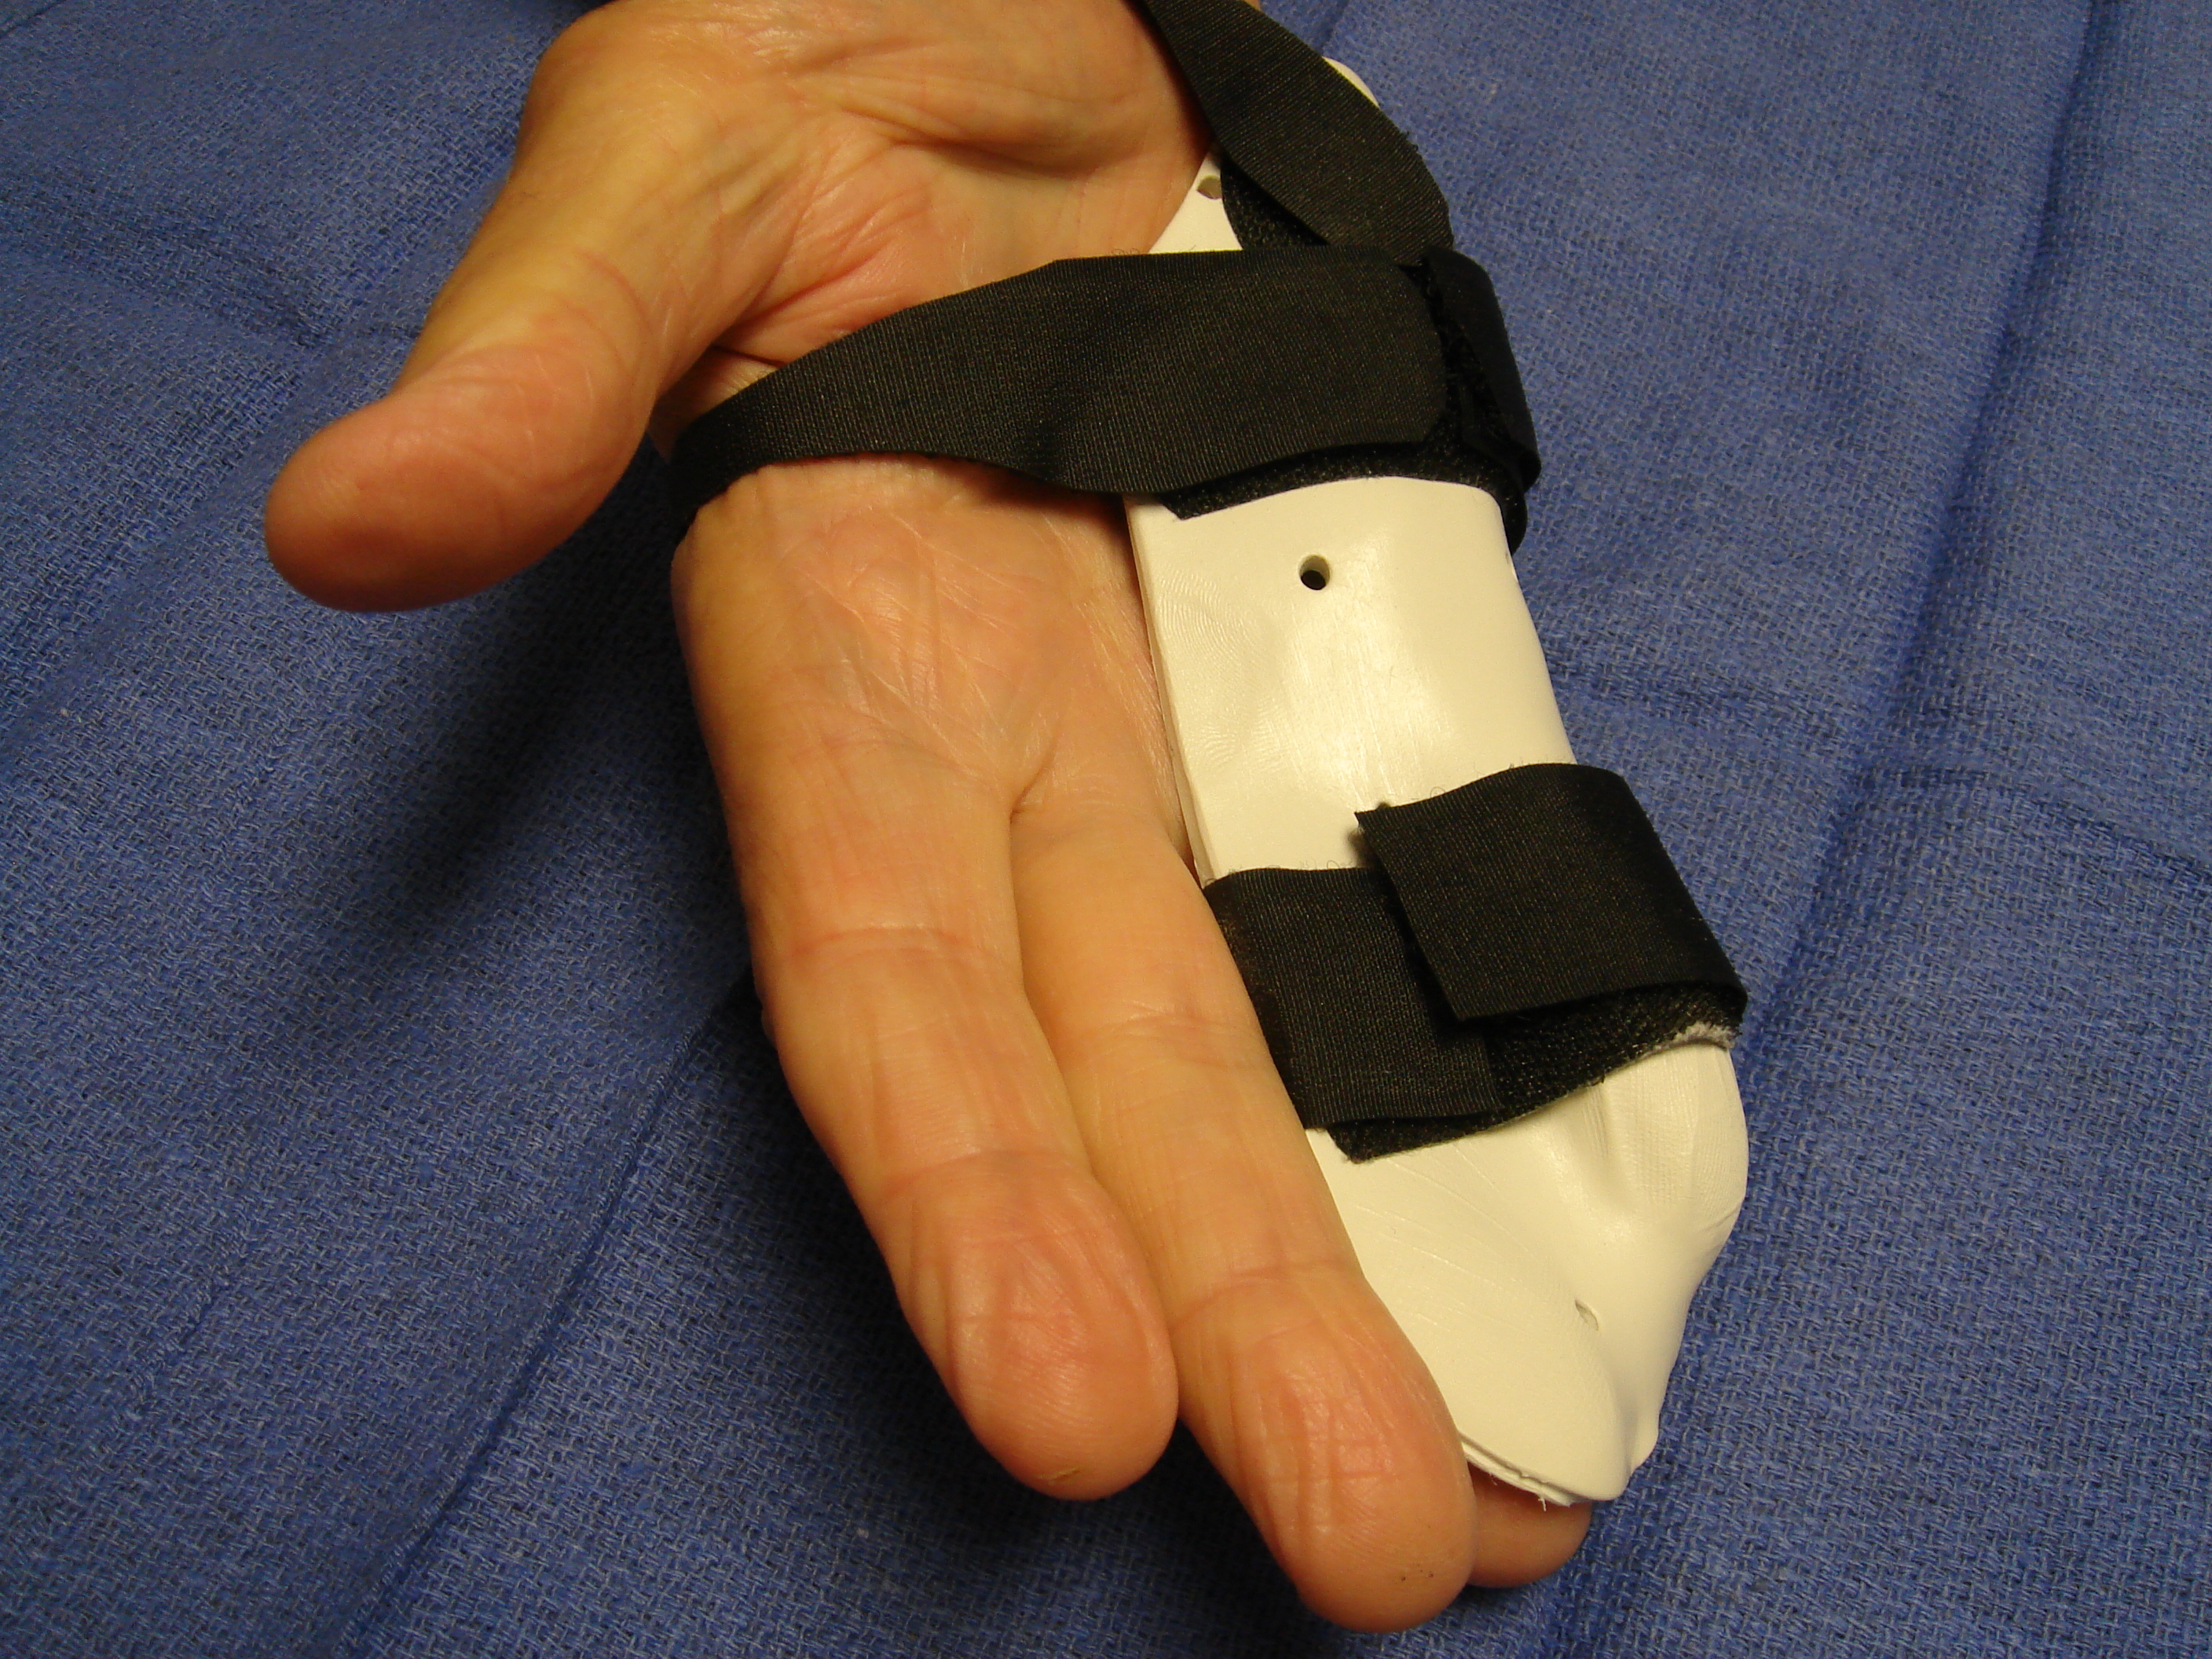 Figure 2d: These photographs illustrate the patient’s hand 7 days post-enzyme injection. The custom thermoplastic night splint is shown; the palmar skin tear and MP crease bruise are healing.